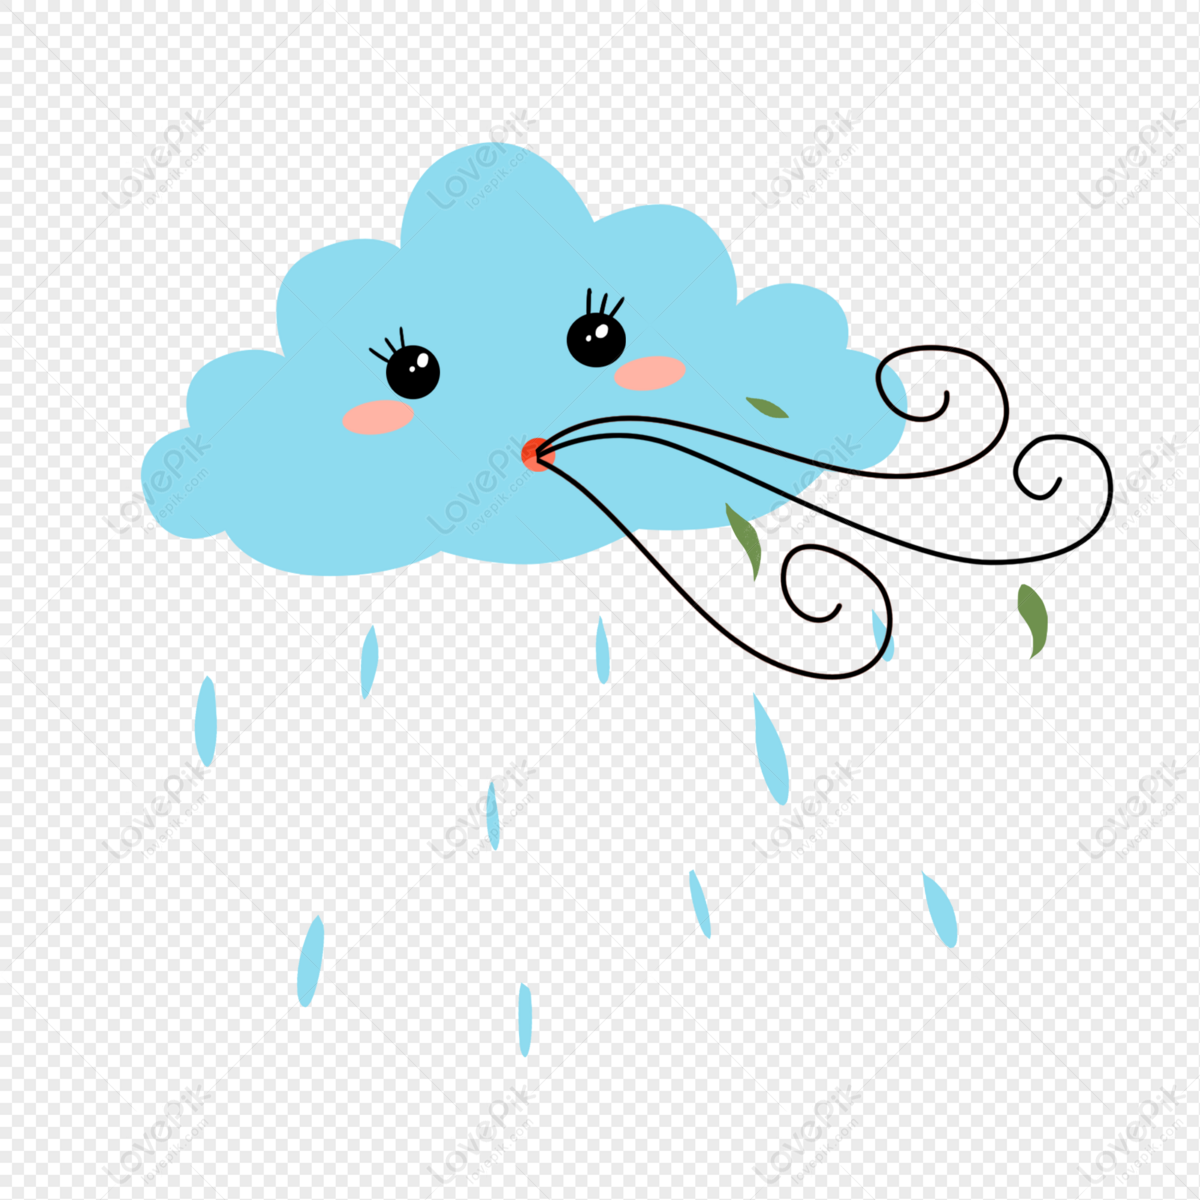 Cartoon Weather Is Windy And Rainy PNG Image Free Download And Clipart  Image For Free Download - Lovepik | 401520821